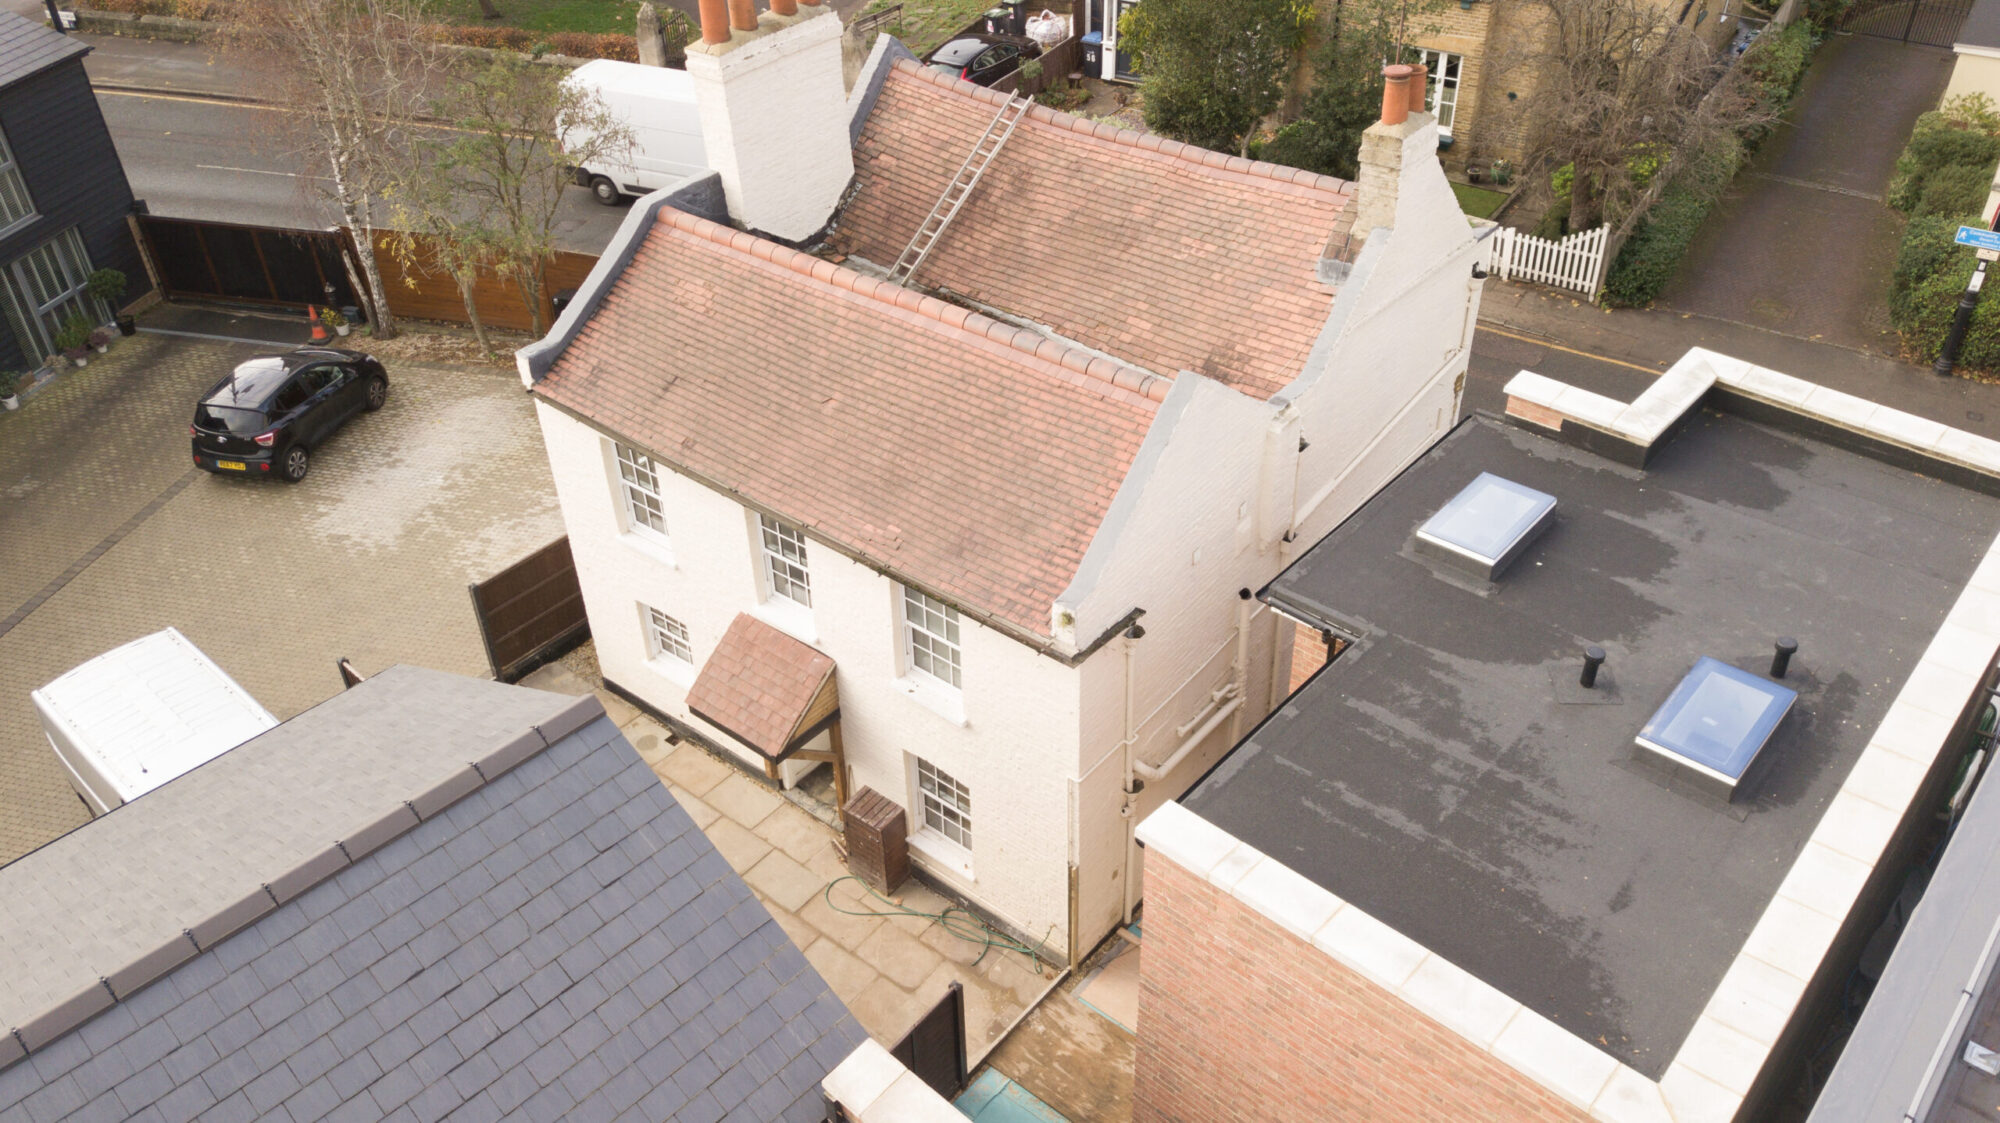 250 year old detached house refurb in one of Enfields best roads